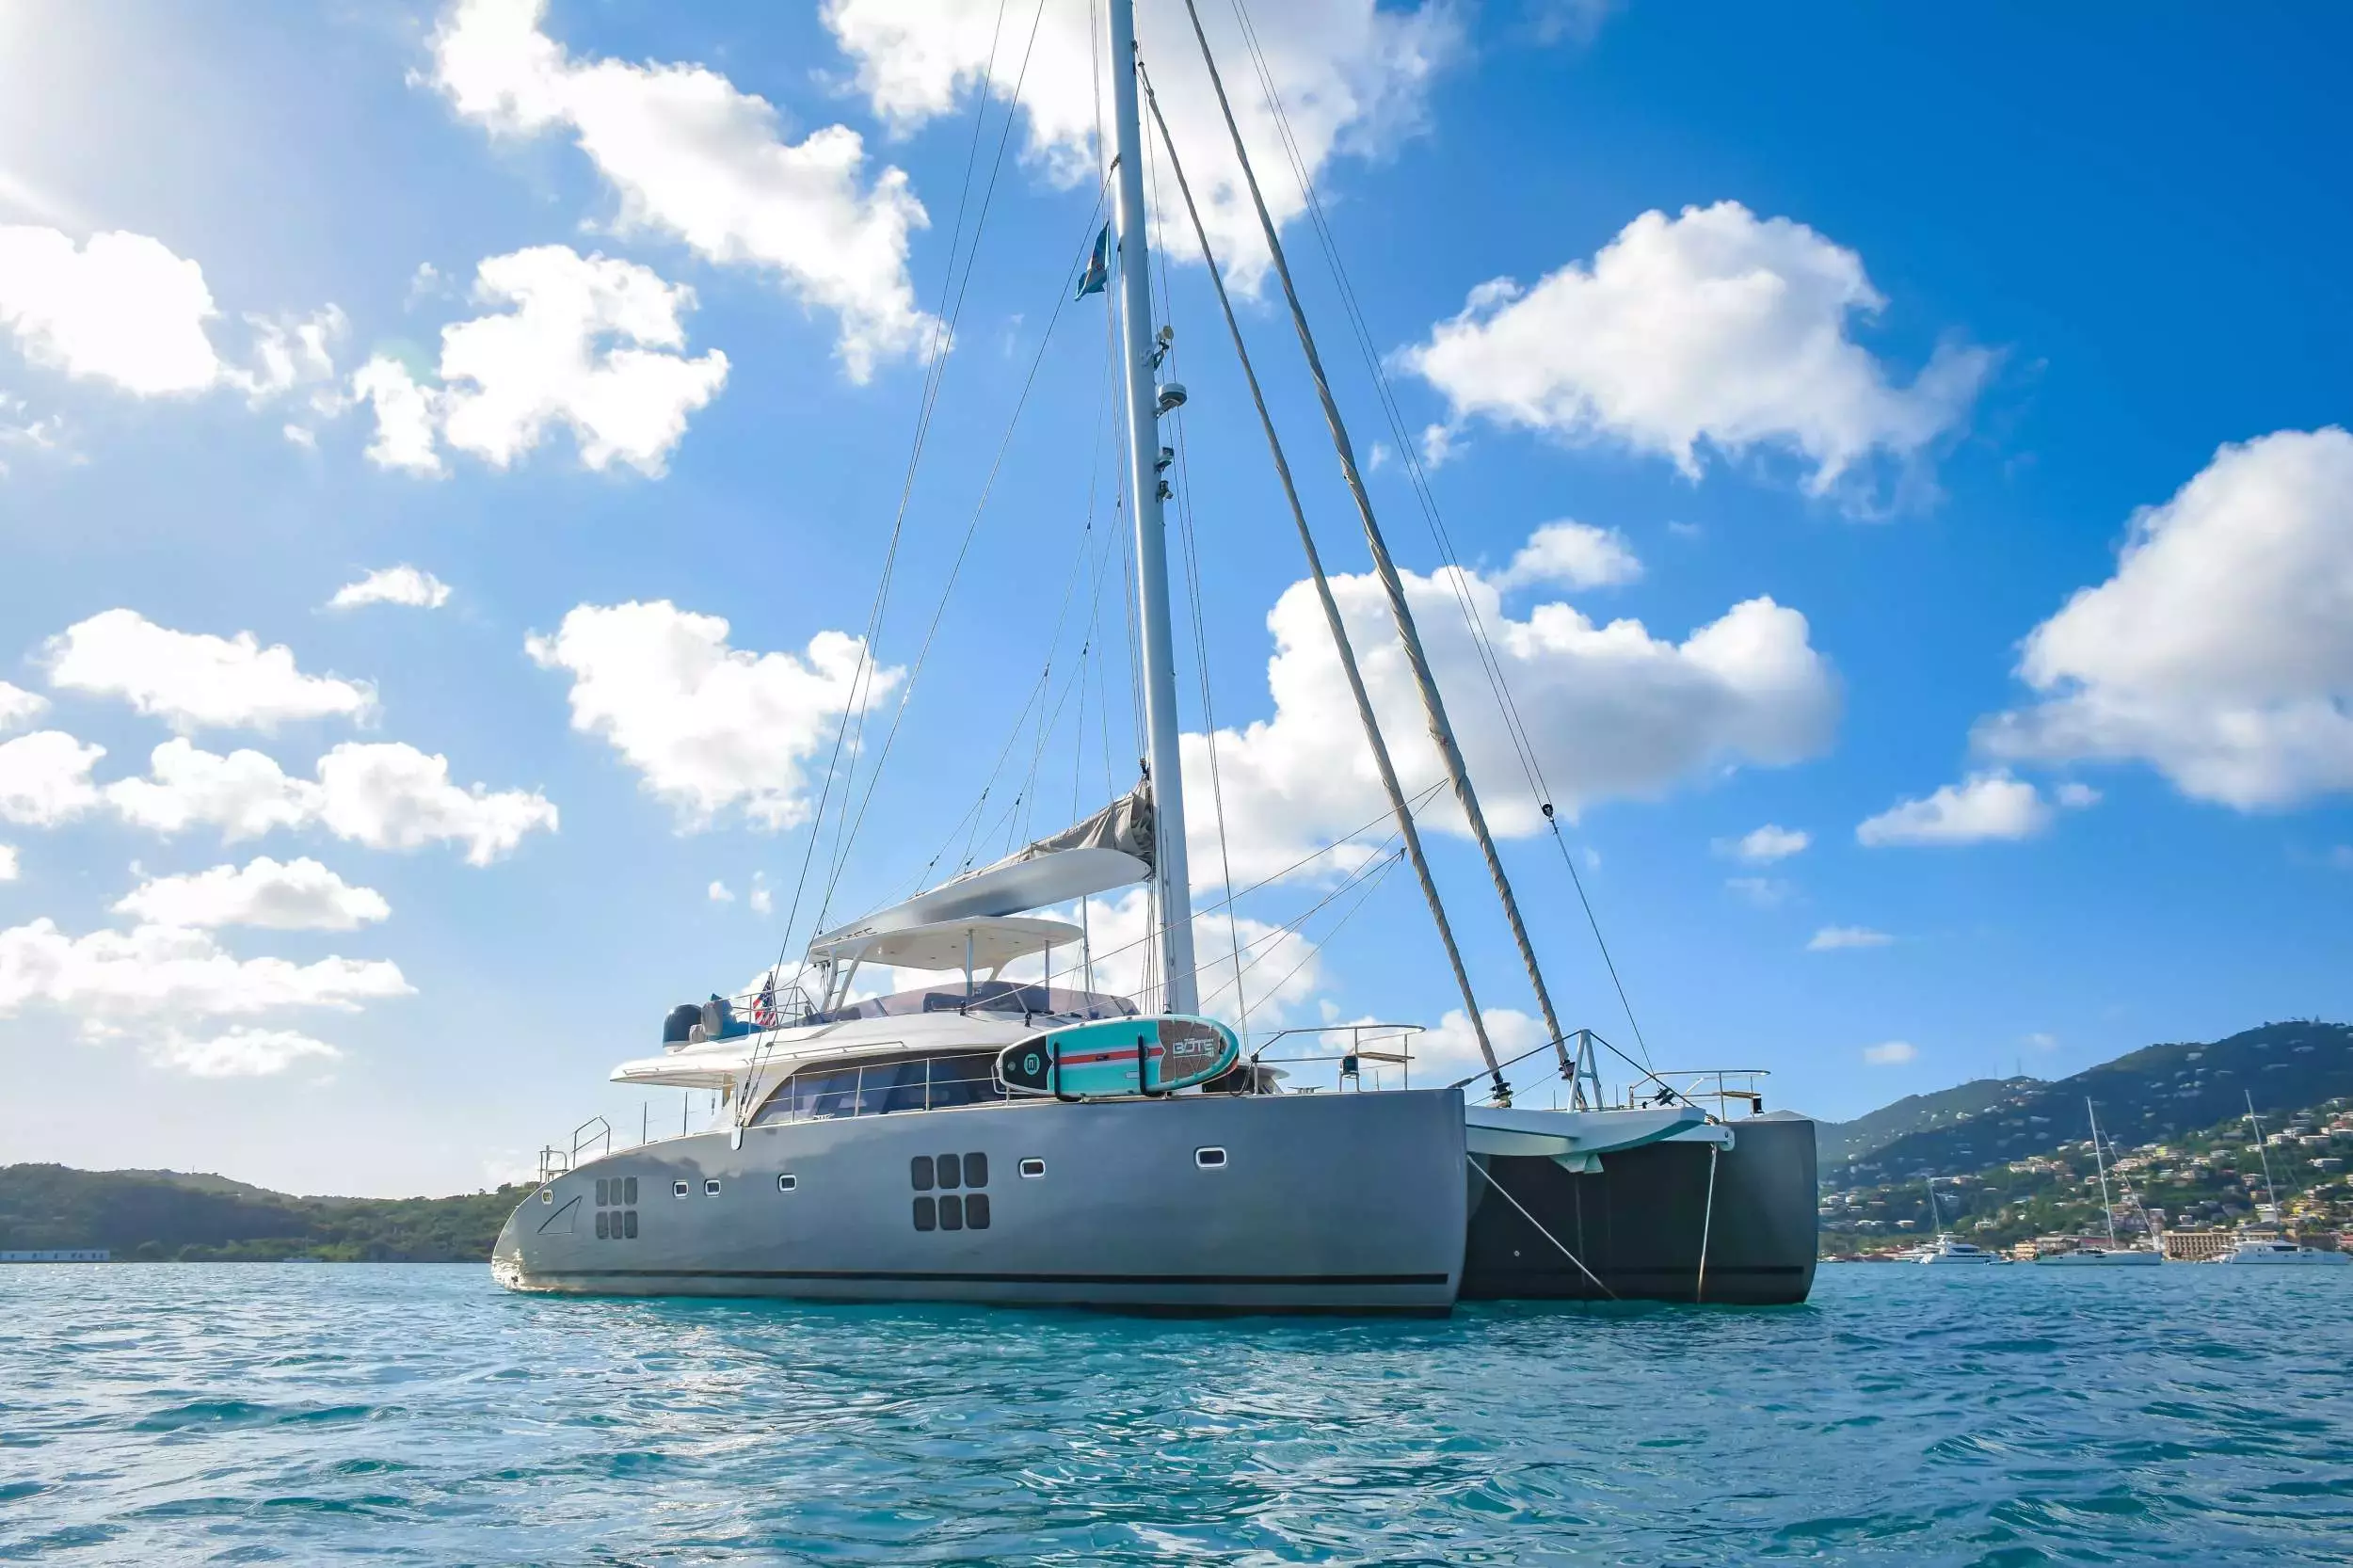 Excess by Sunreef Yachts - Special Offer for a private Luxury Catamaran Rental in St Thomas with a crew